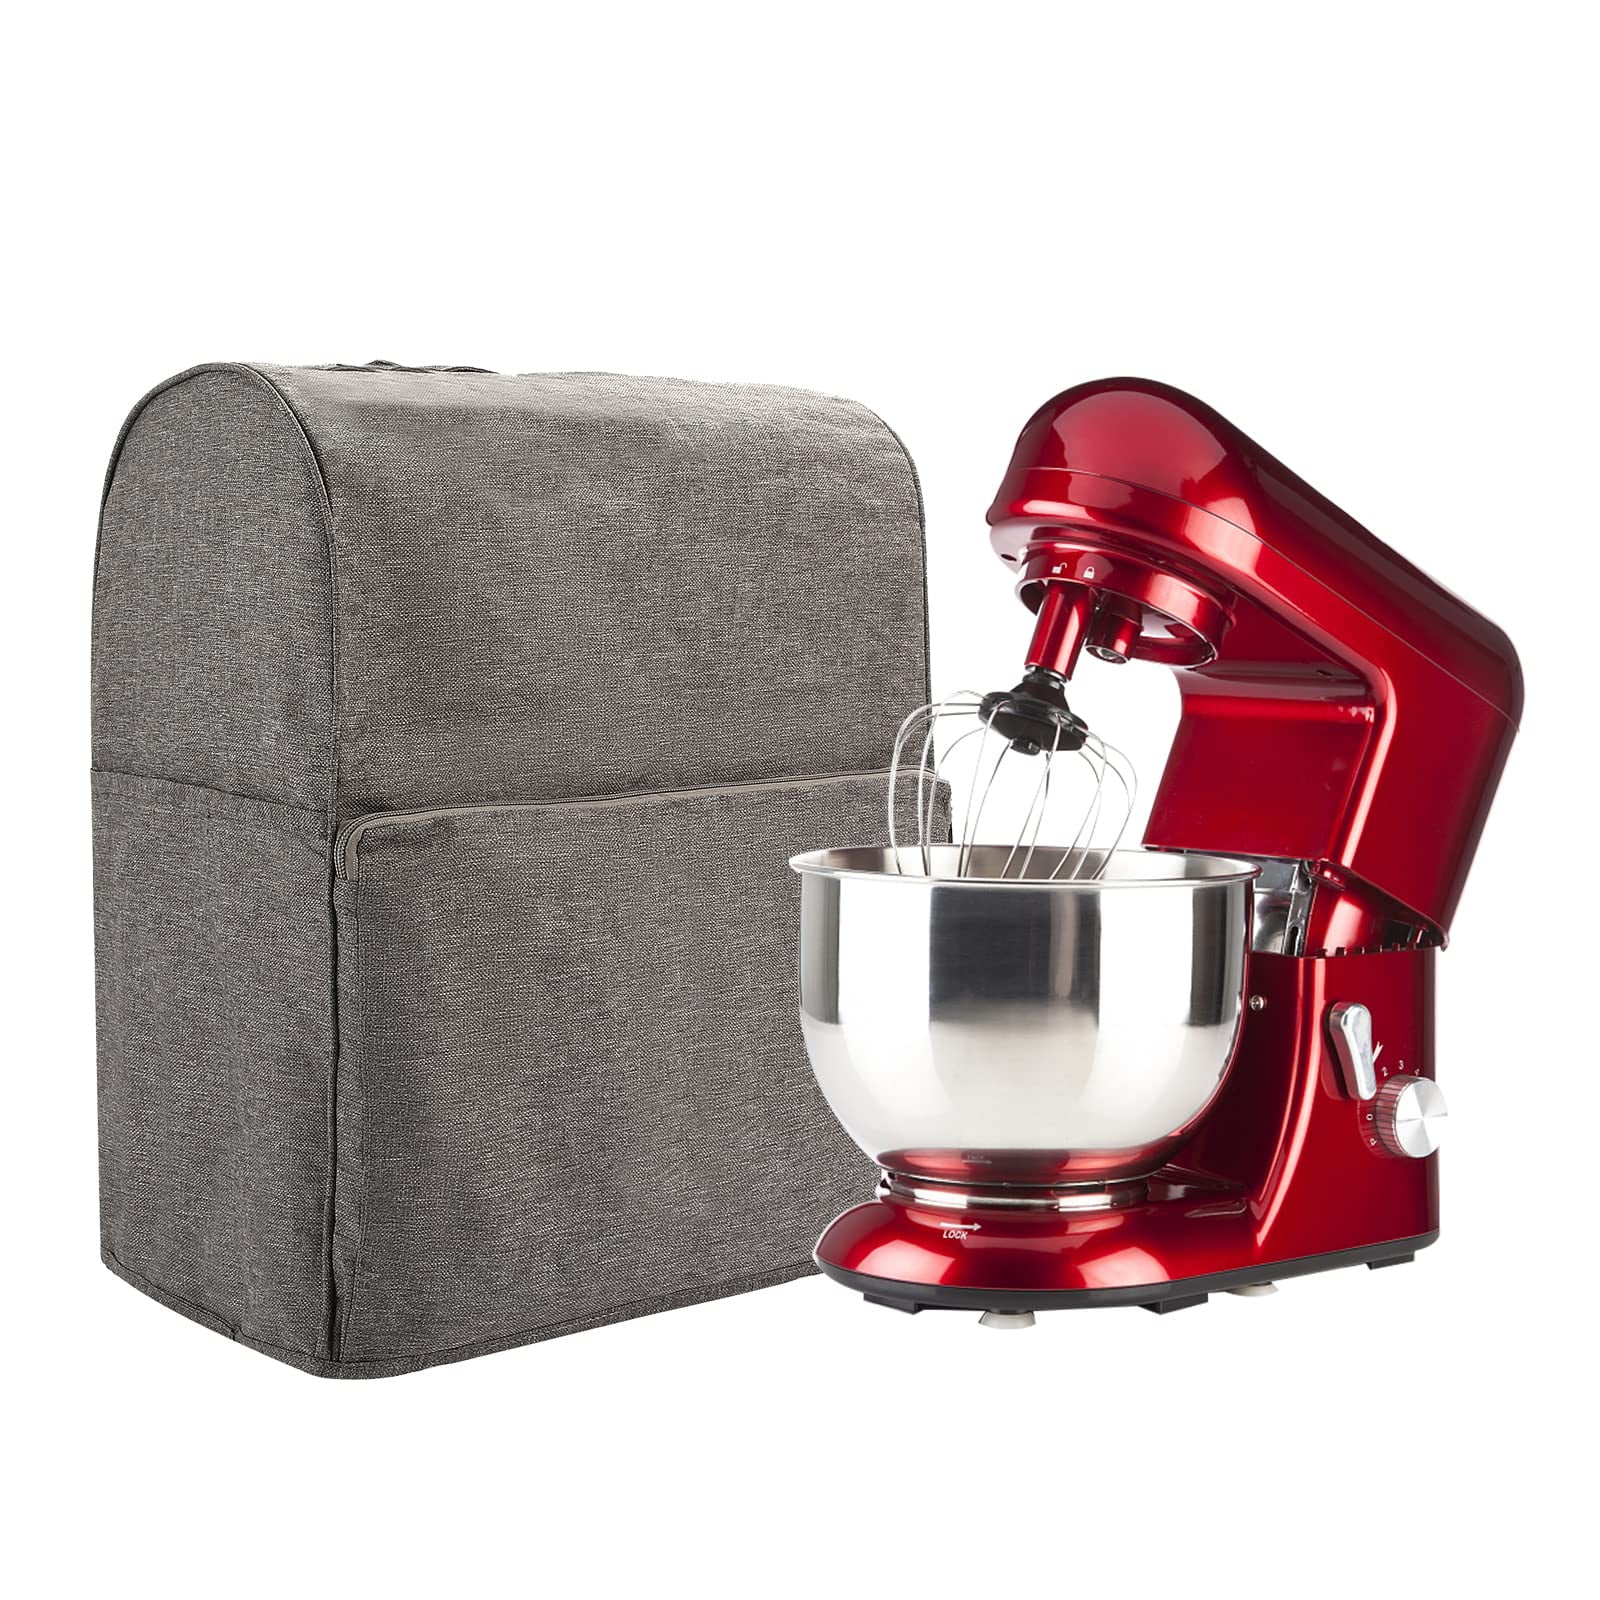 Stand Mixer Dust-Proof Cover with Pocket and Organizer Bag for Kitchenaid ,Sunbeam,Cuisinart (Black/Coffee/Red) 